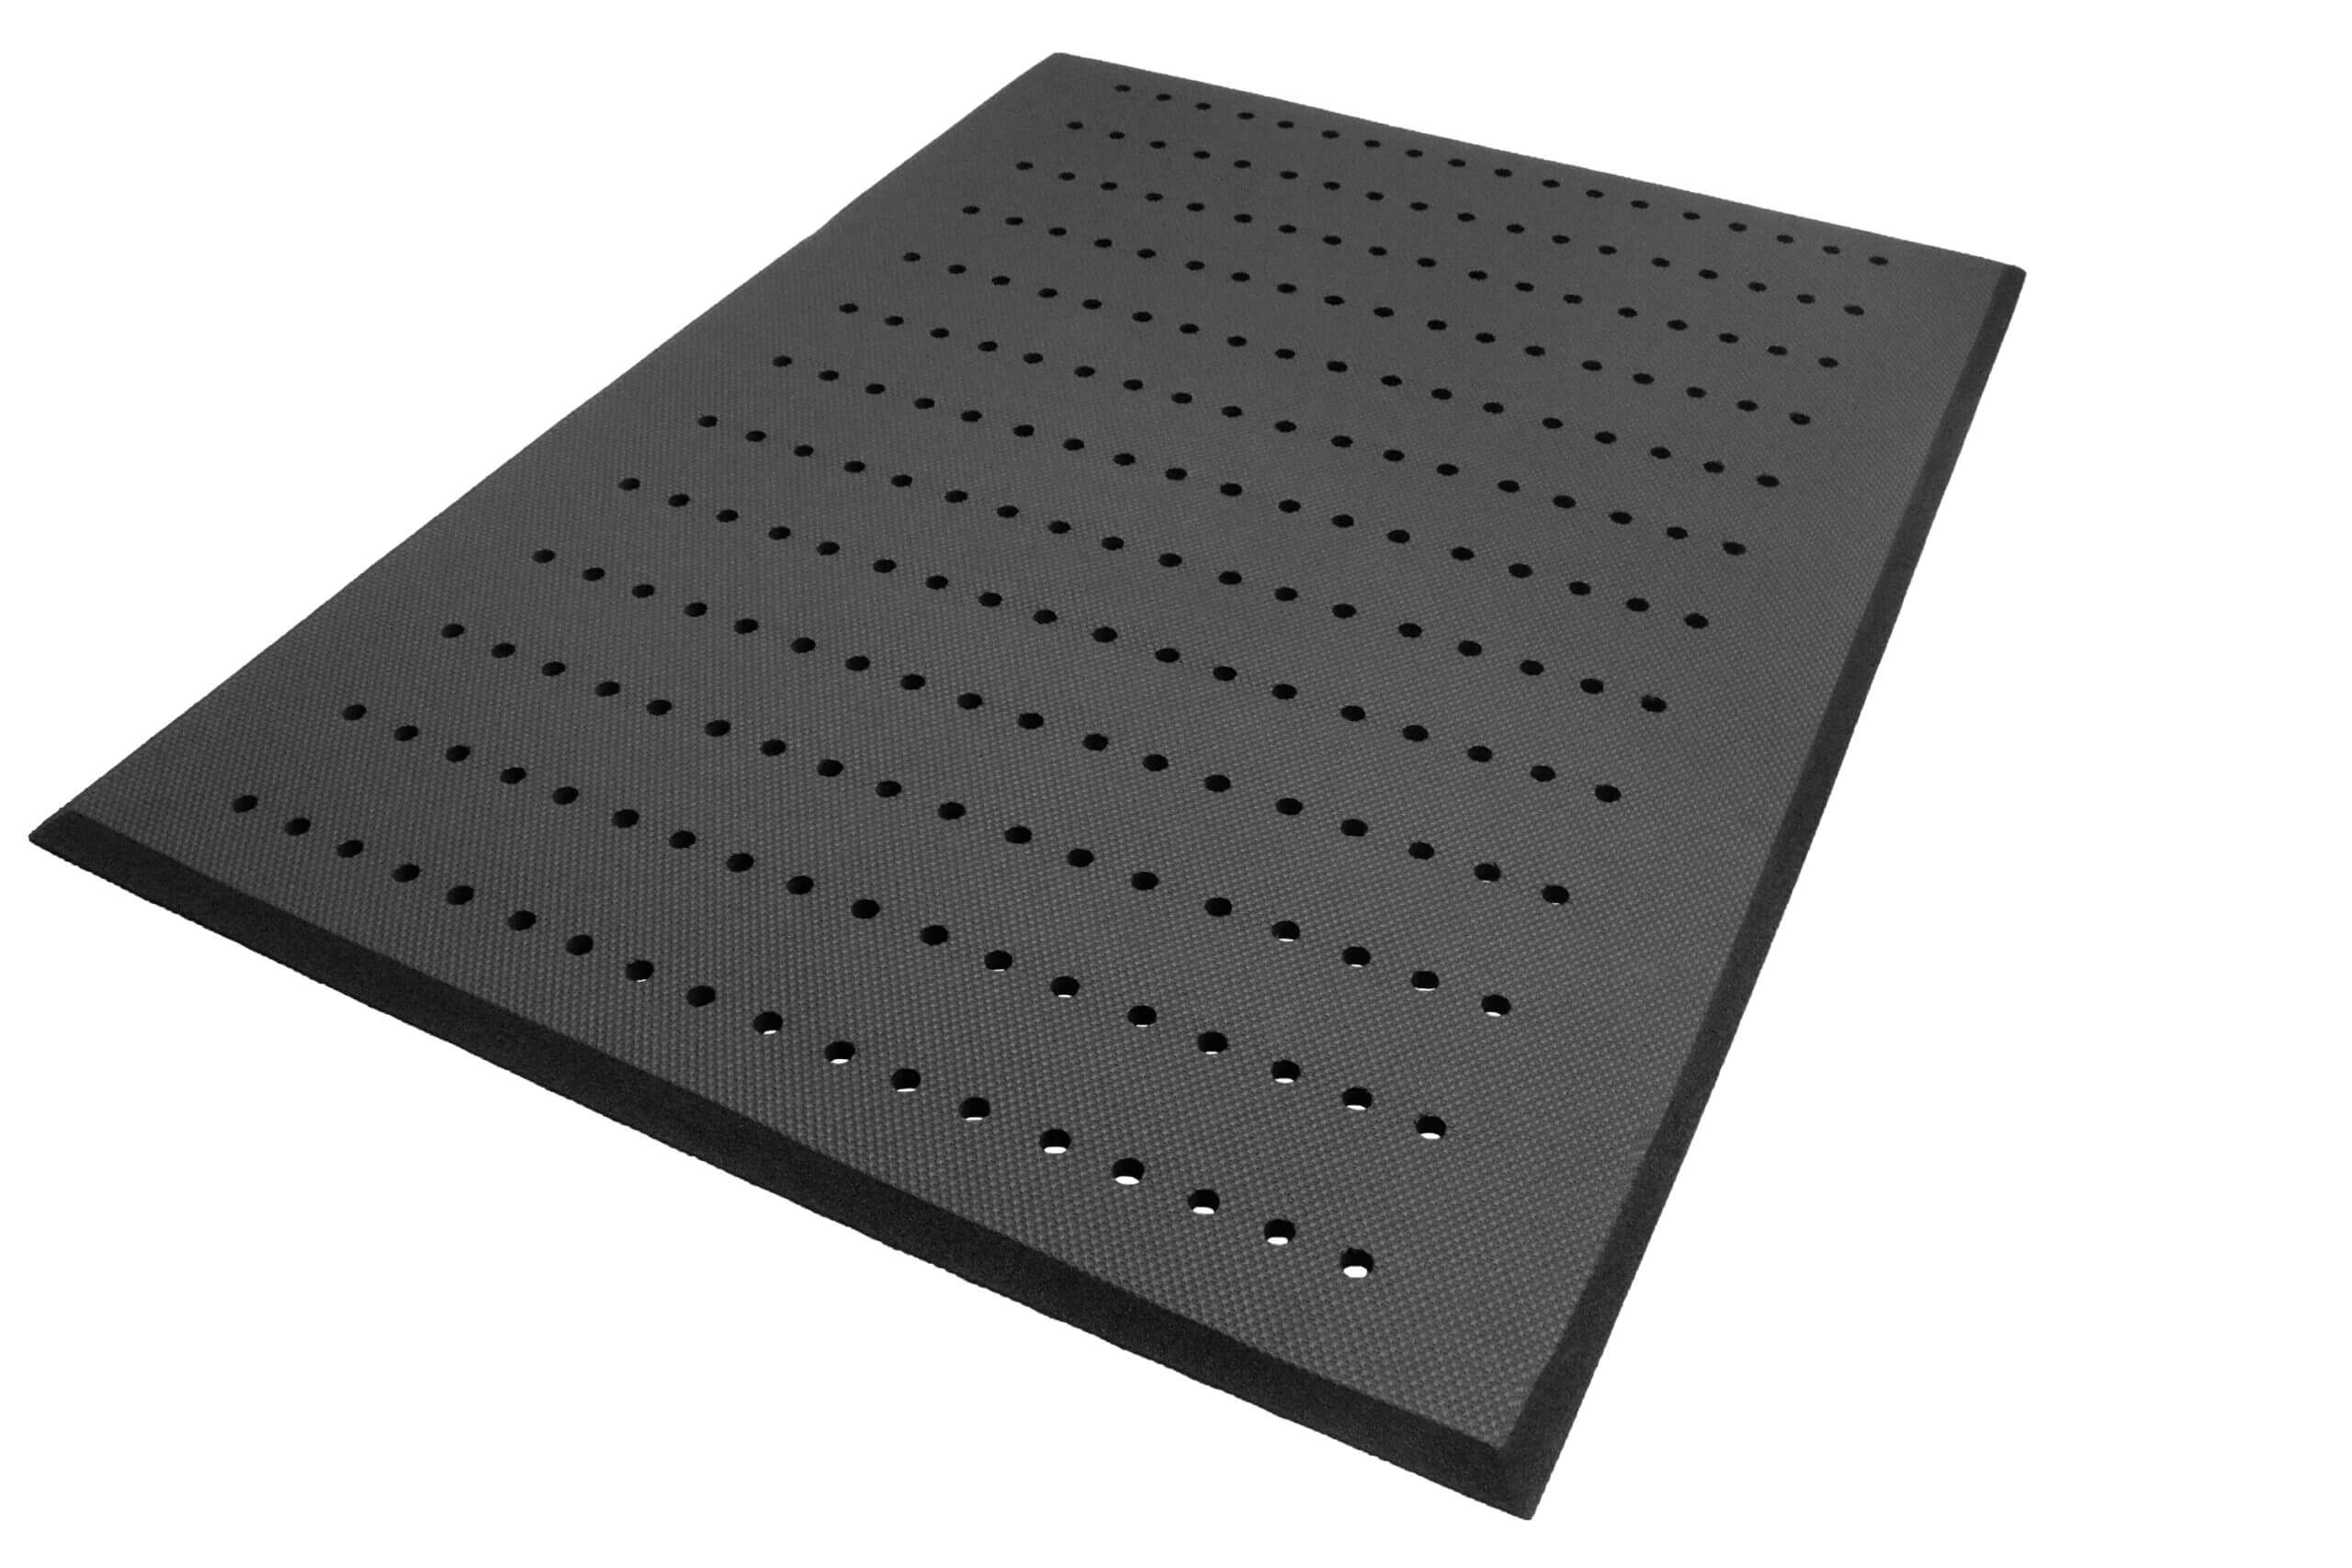 isolated image of an anti-fatigue mat